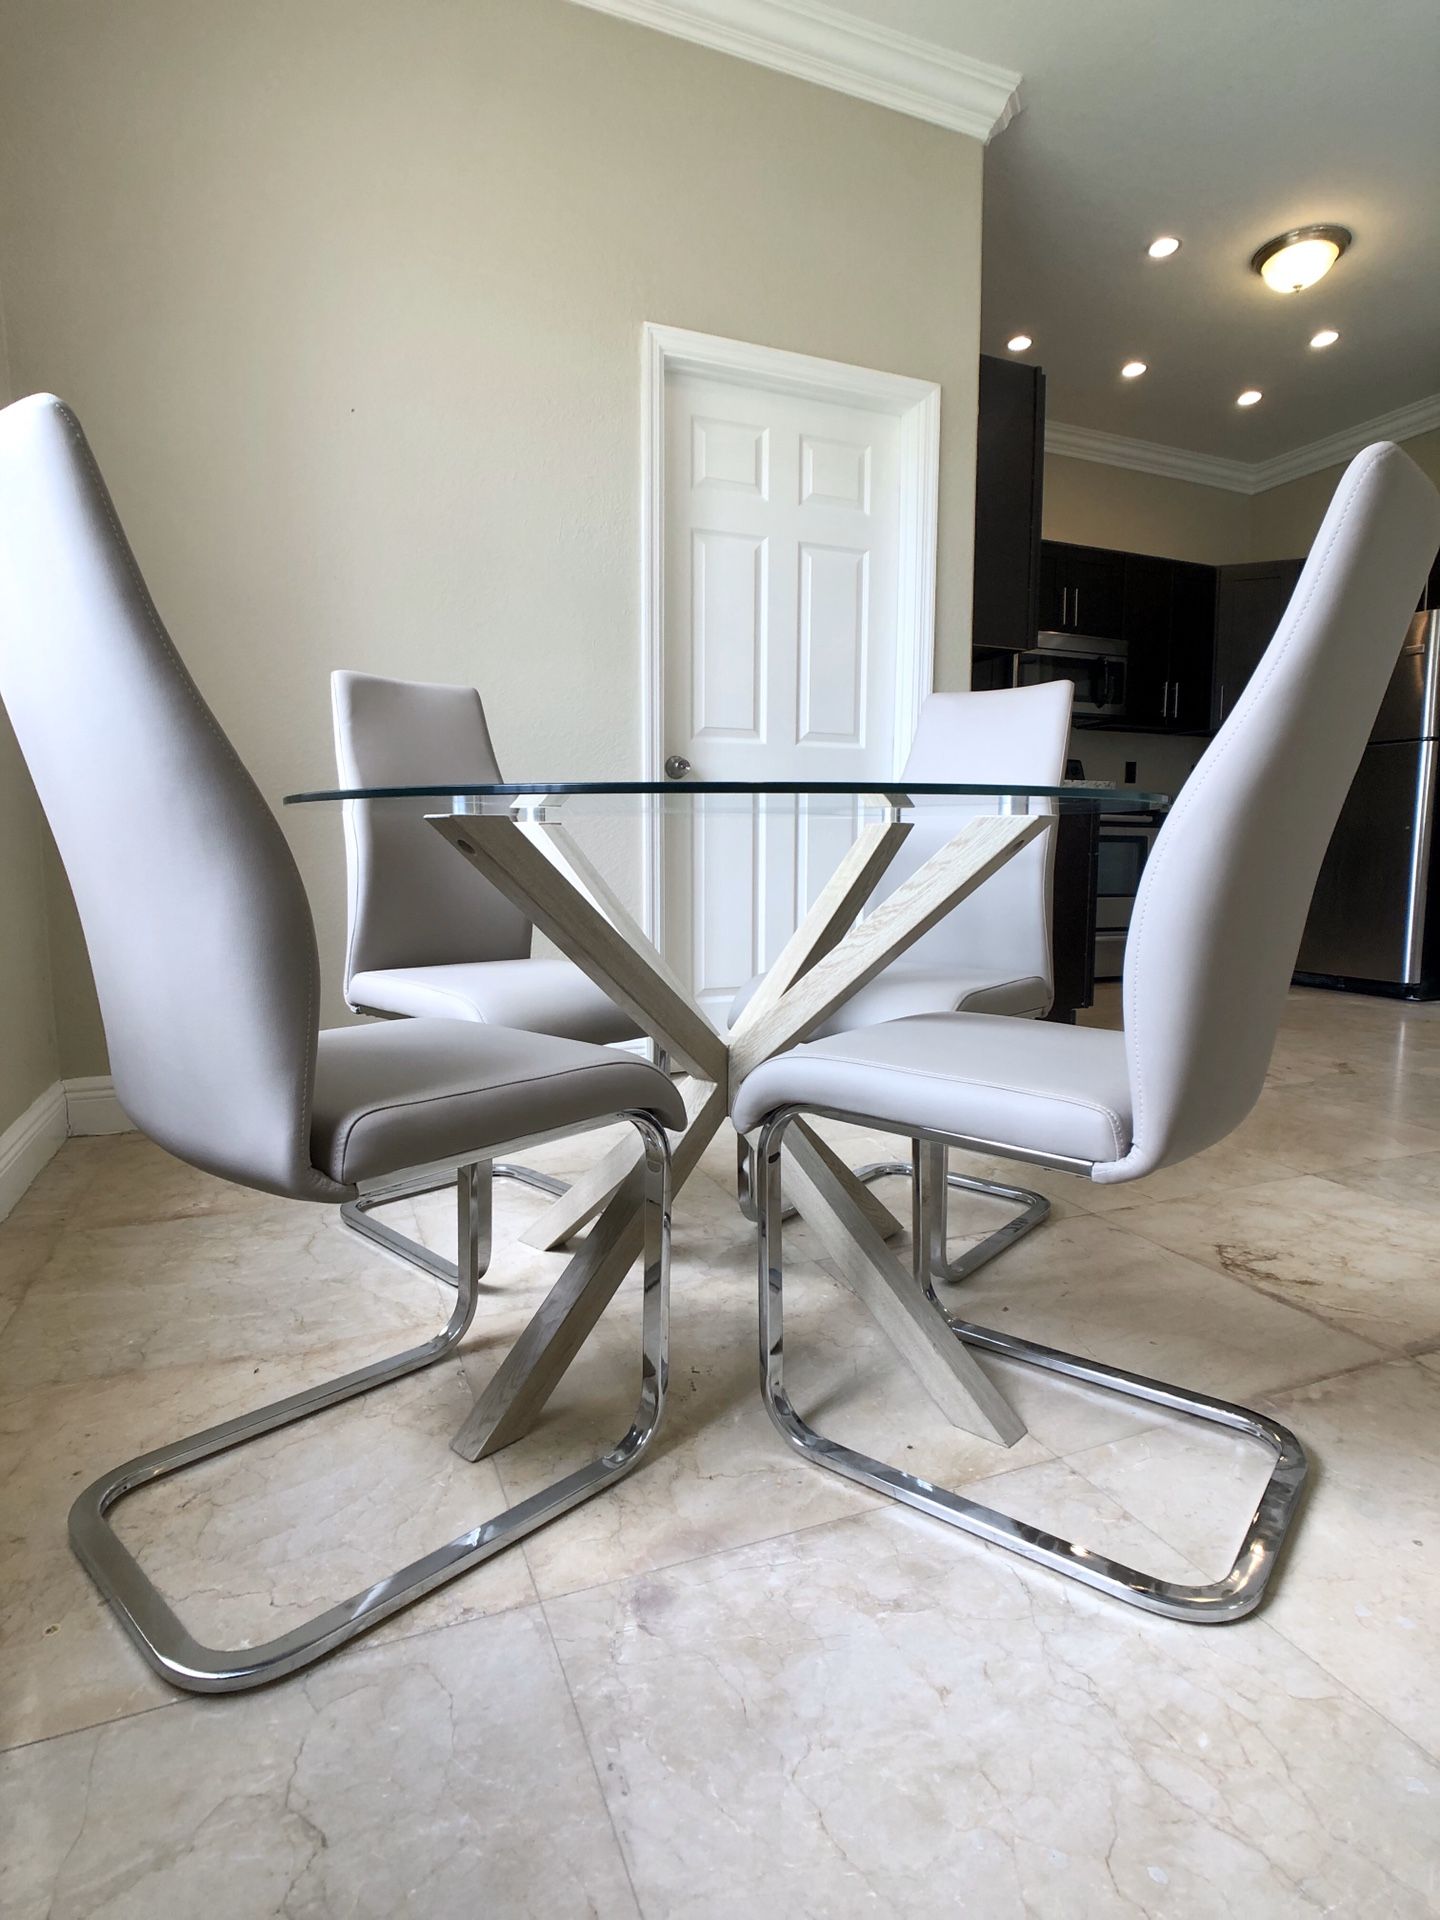 BRAND NEW MODERN GLASS DINING TABLE !! LEATHER CHAIRS WITH CHROME LEGS !! PAID $800 !!